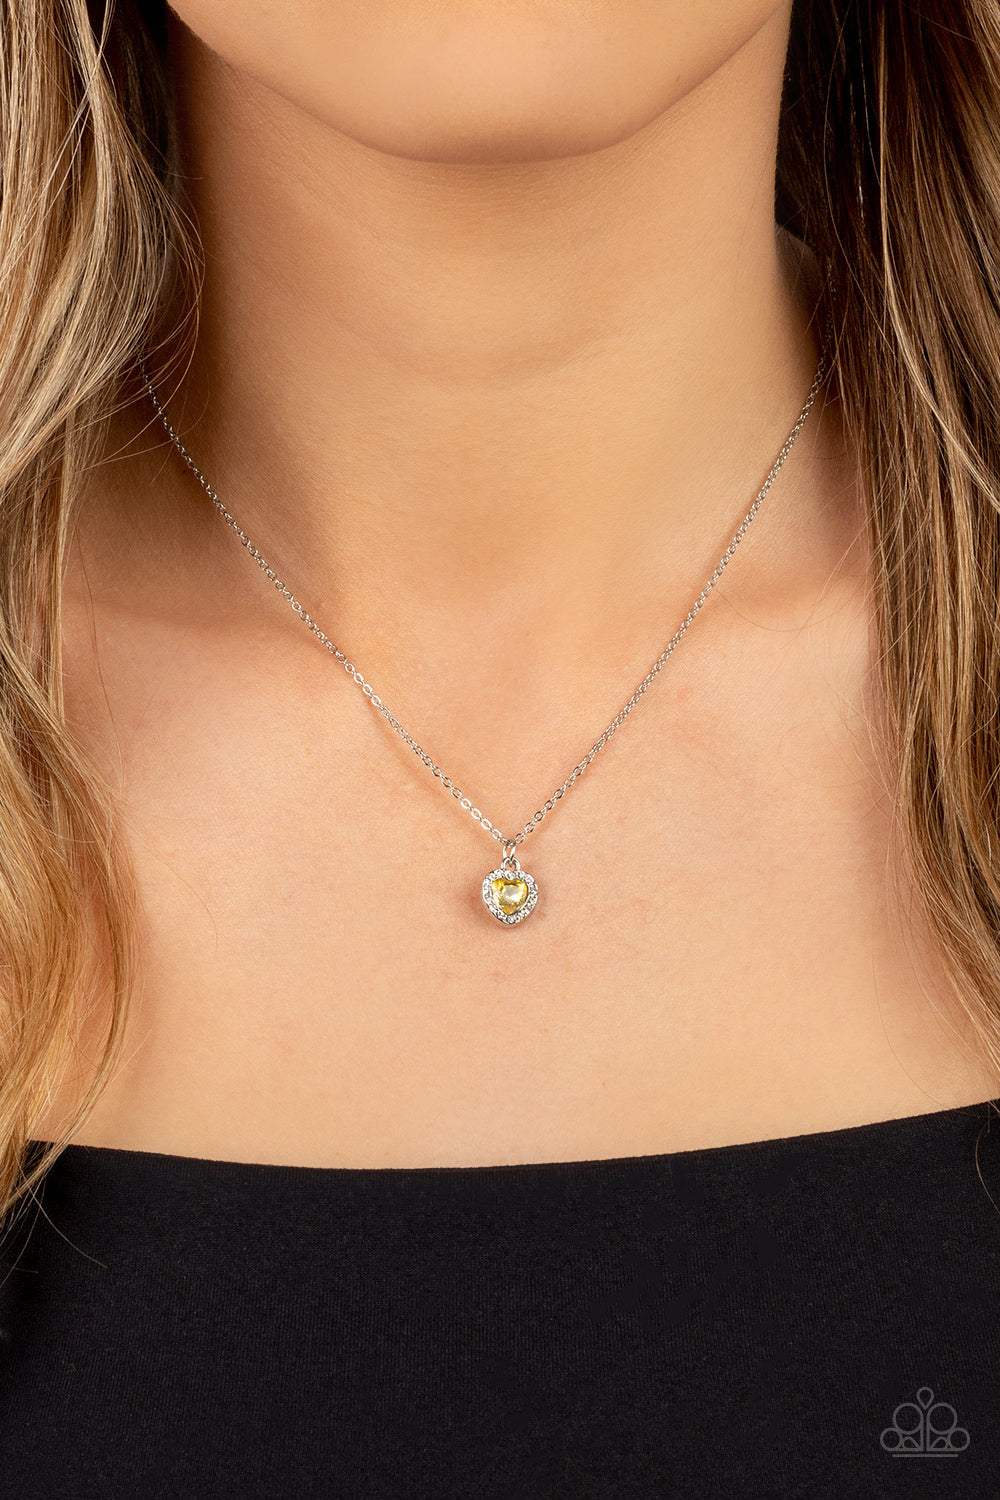 A Little Lovestruck - Yellow and Silver Heart Rhinestone Necklace - Paparazzi Accessories - Dainty yellow rhinestone heart sparkles along a dainty silver chain below the collar for a flirtatious fashion.